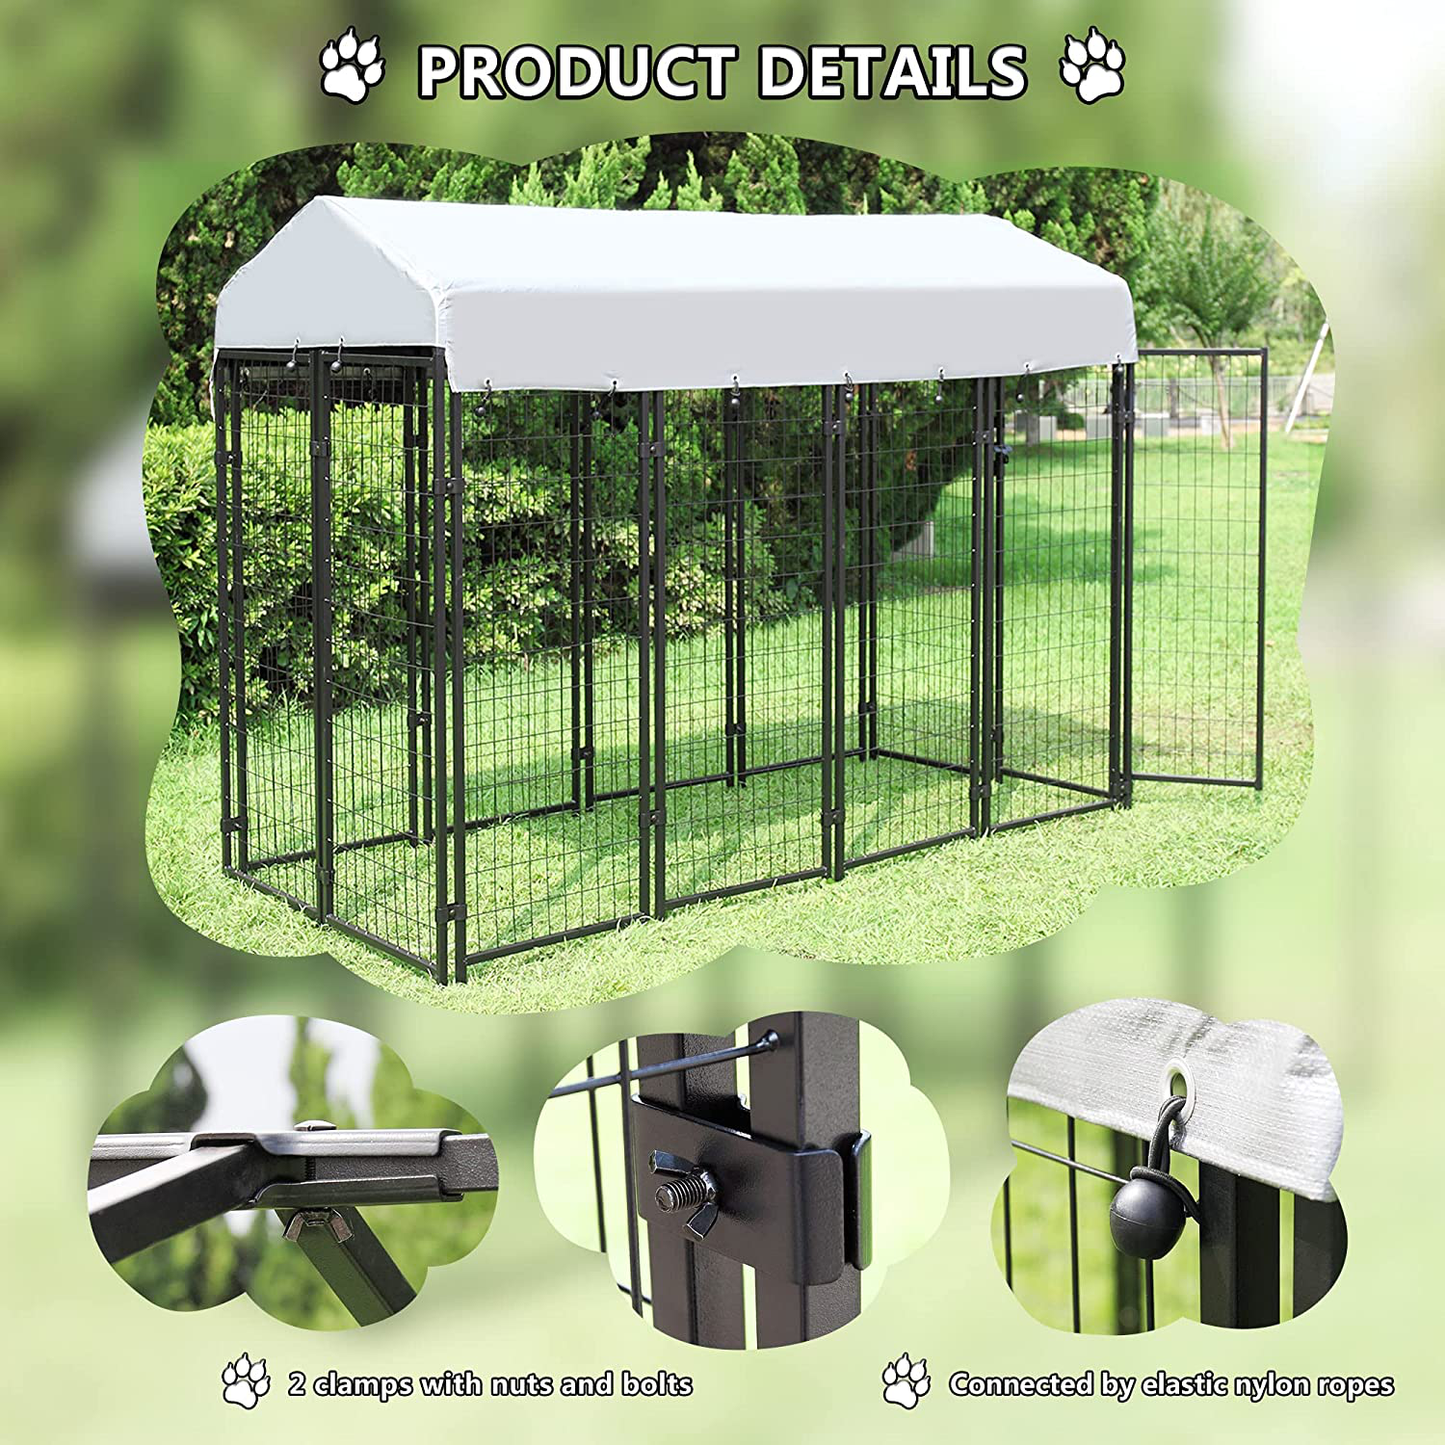 JAXPETY Large Dog Uptown Welded Wire Kennel Outdoor Pen outside Exercise Crate Pet Wire Cage W/ Roof